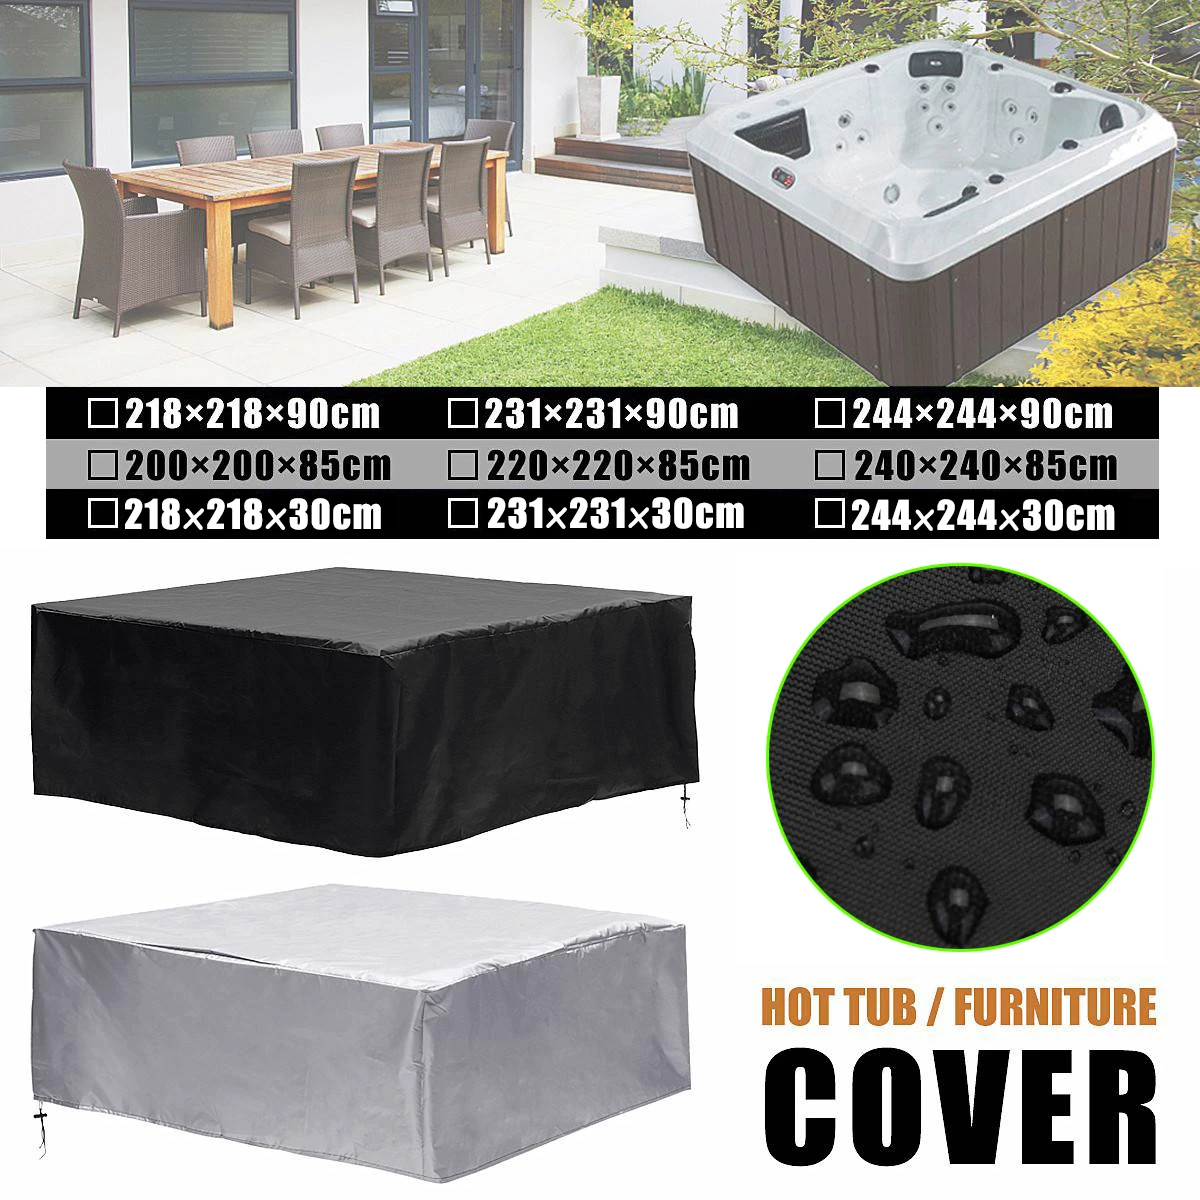 14 Oxford fabric Hot Tub Spa Cover Outdoor Waterproof Dust Protector Case